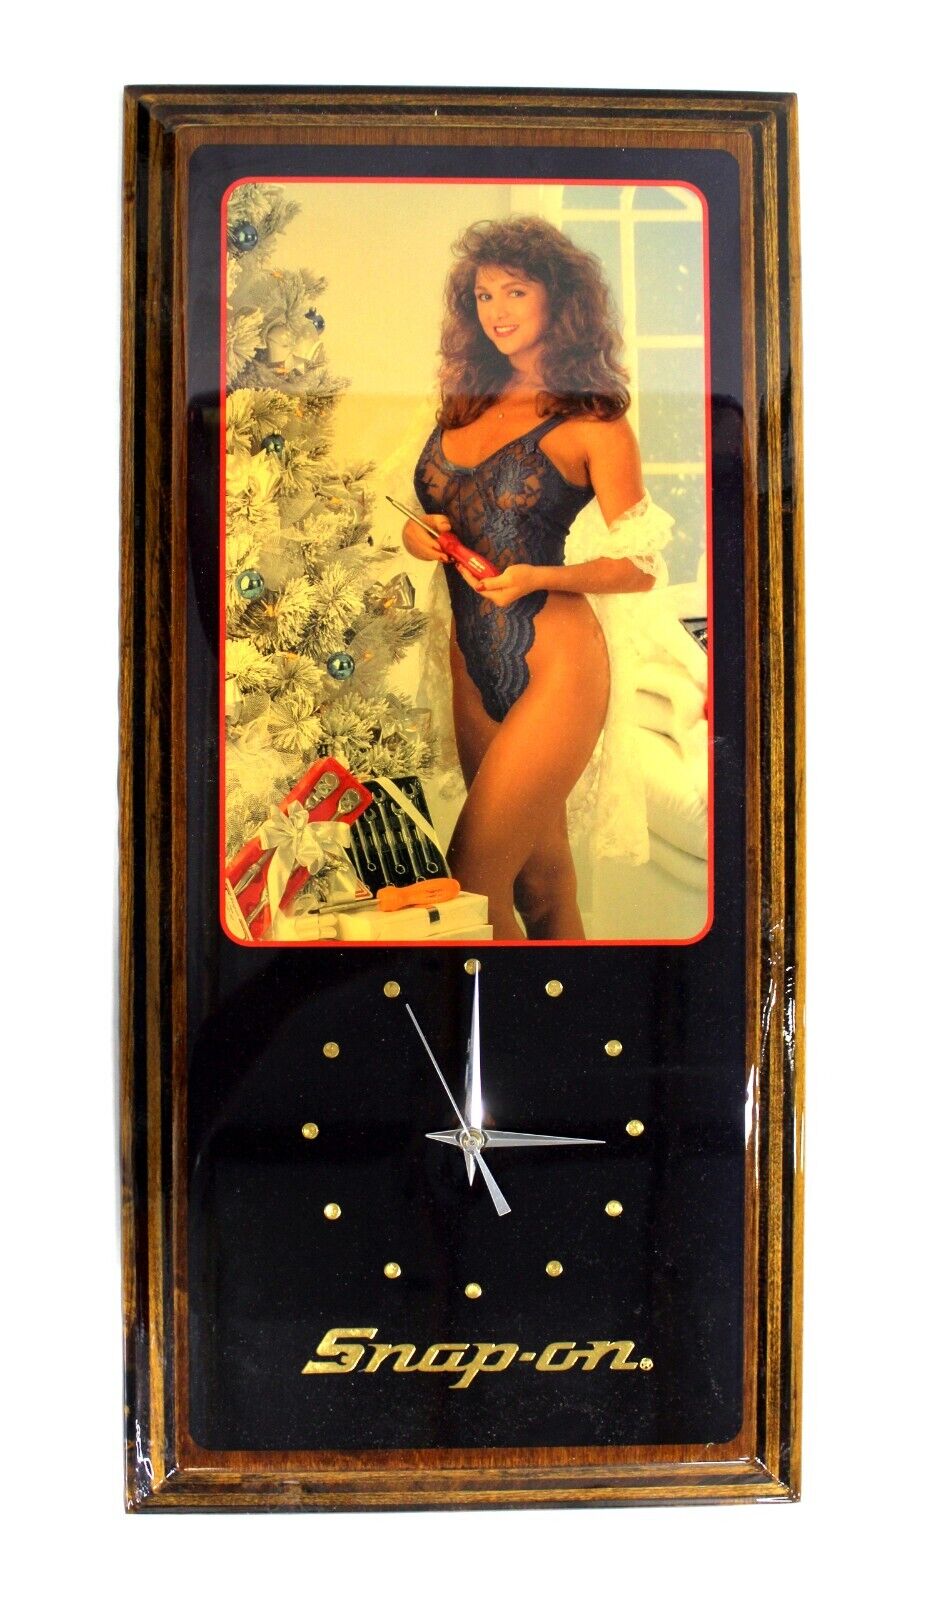 Vintage Snap-On Tools Lingerie Pinup Girl Wall Clock 80s Christmas Girl - New